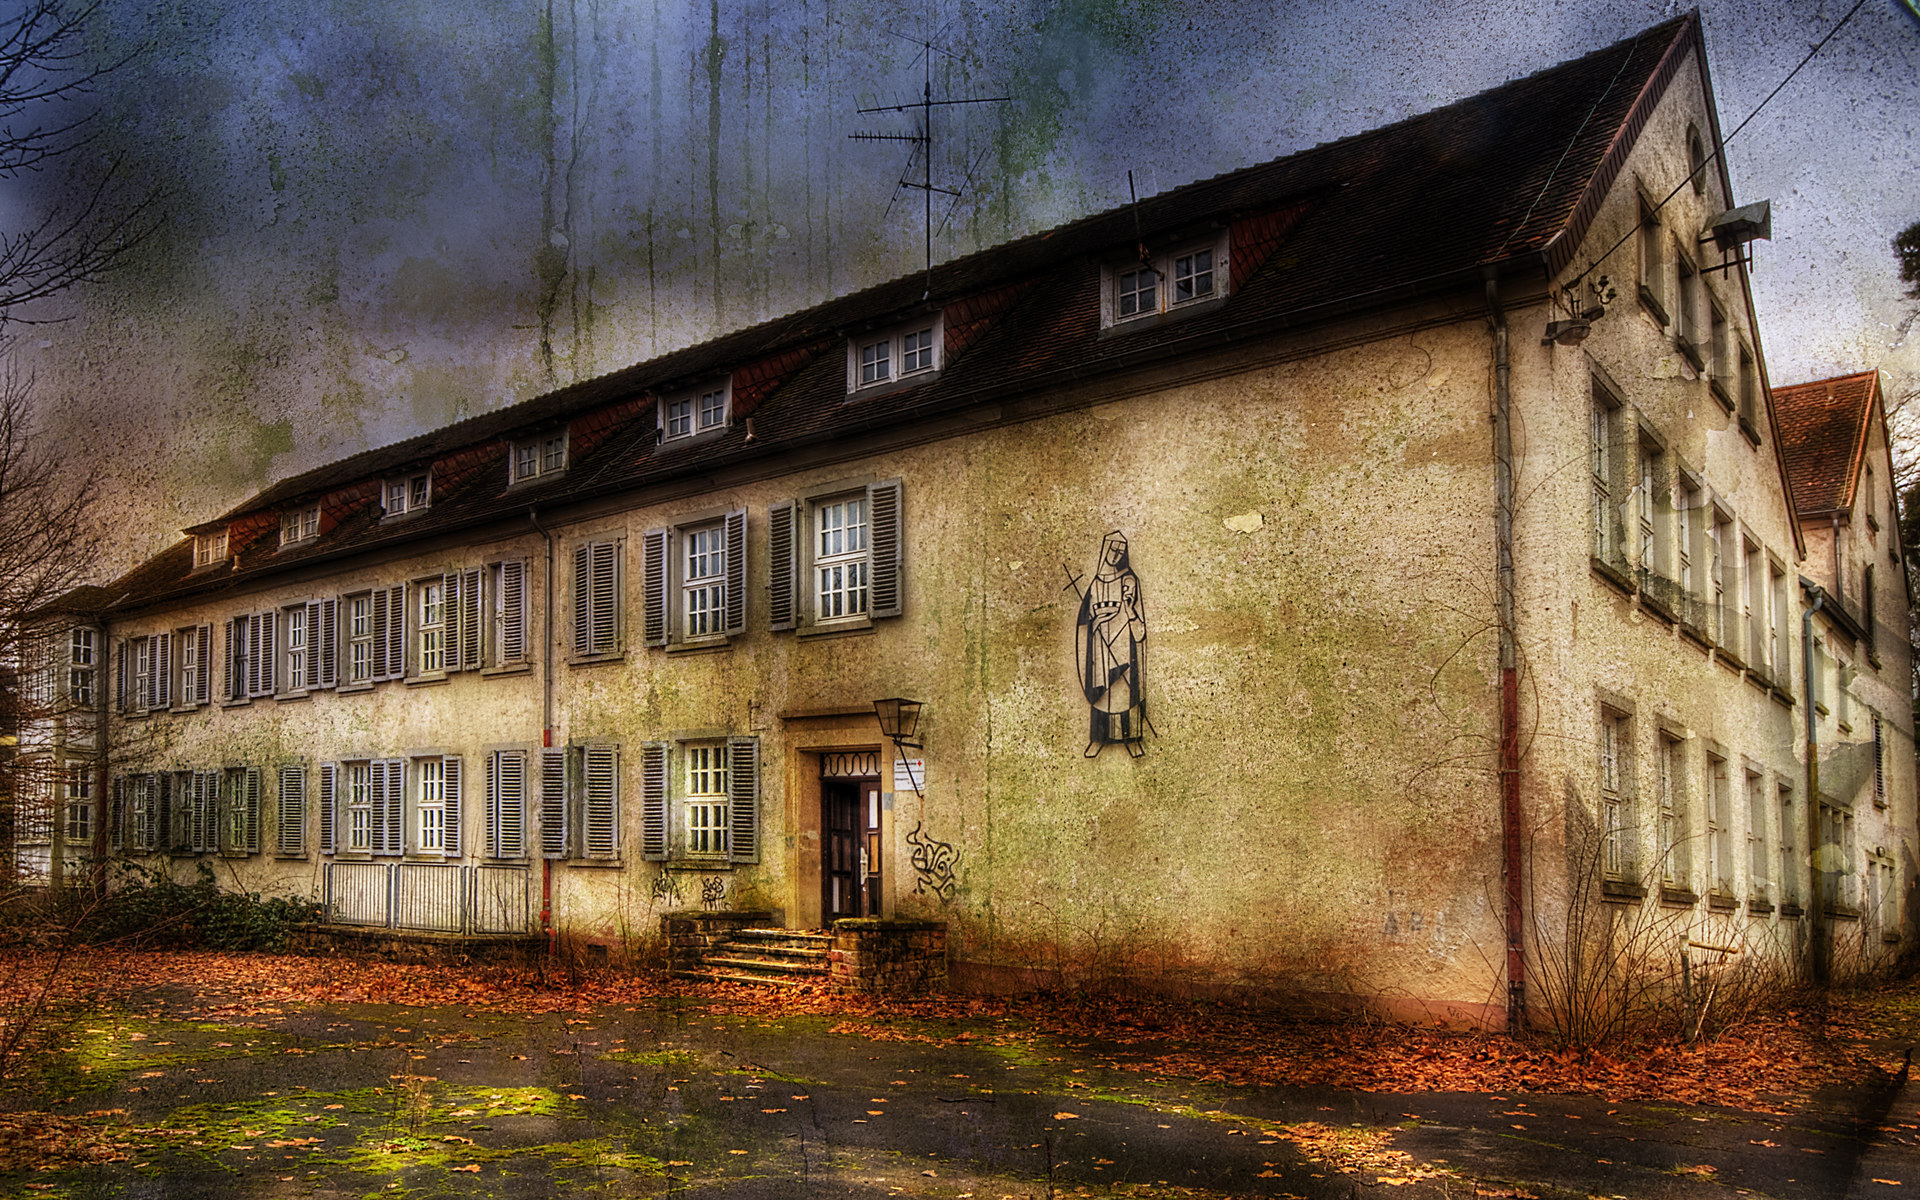 Urban Ruins And Abandoned Buildings Is A Great Wallpaper For Your